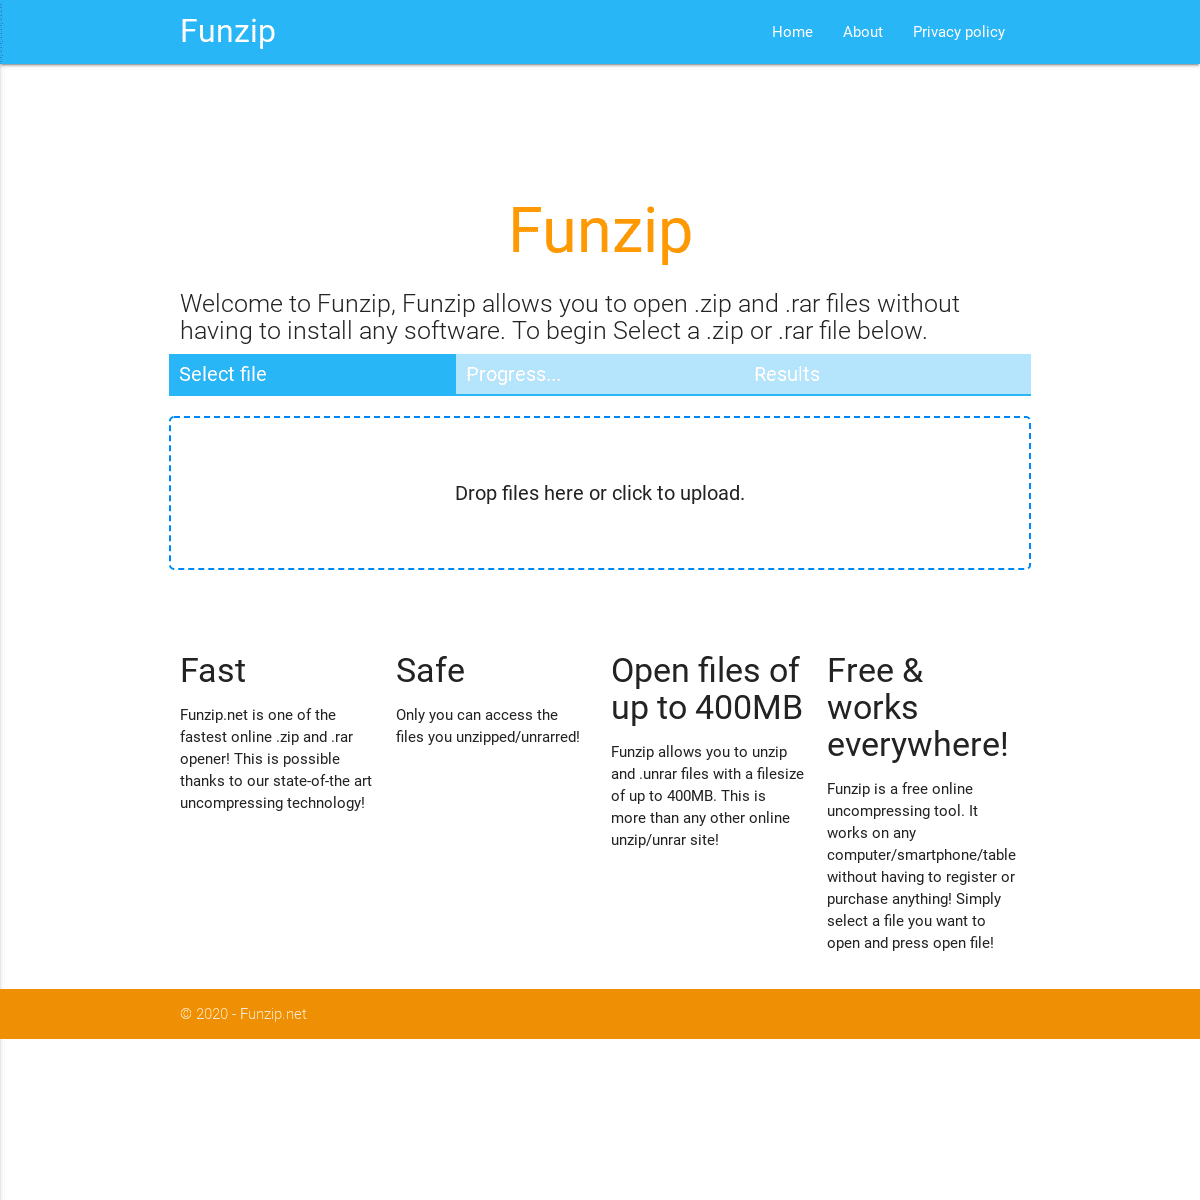 A complete backup of funzip.net